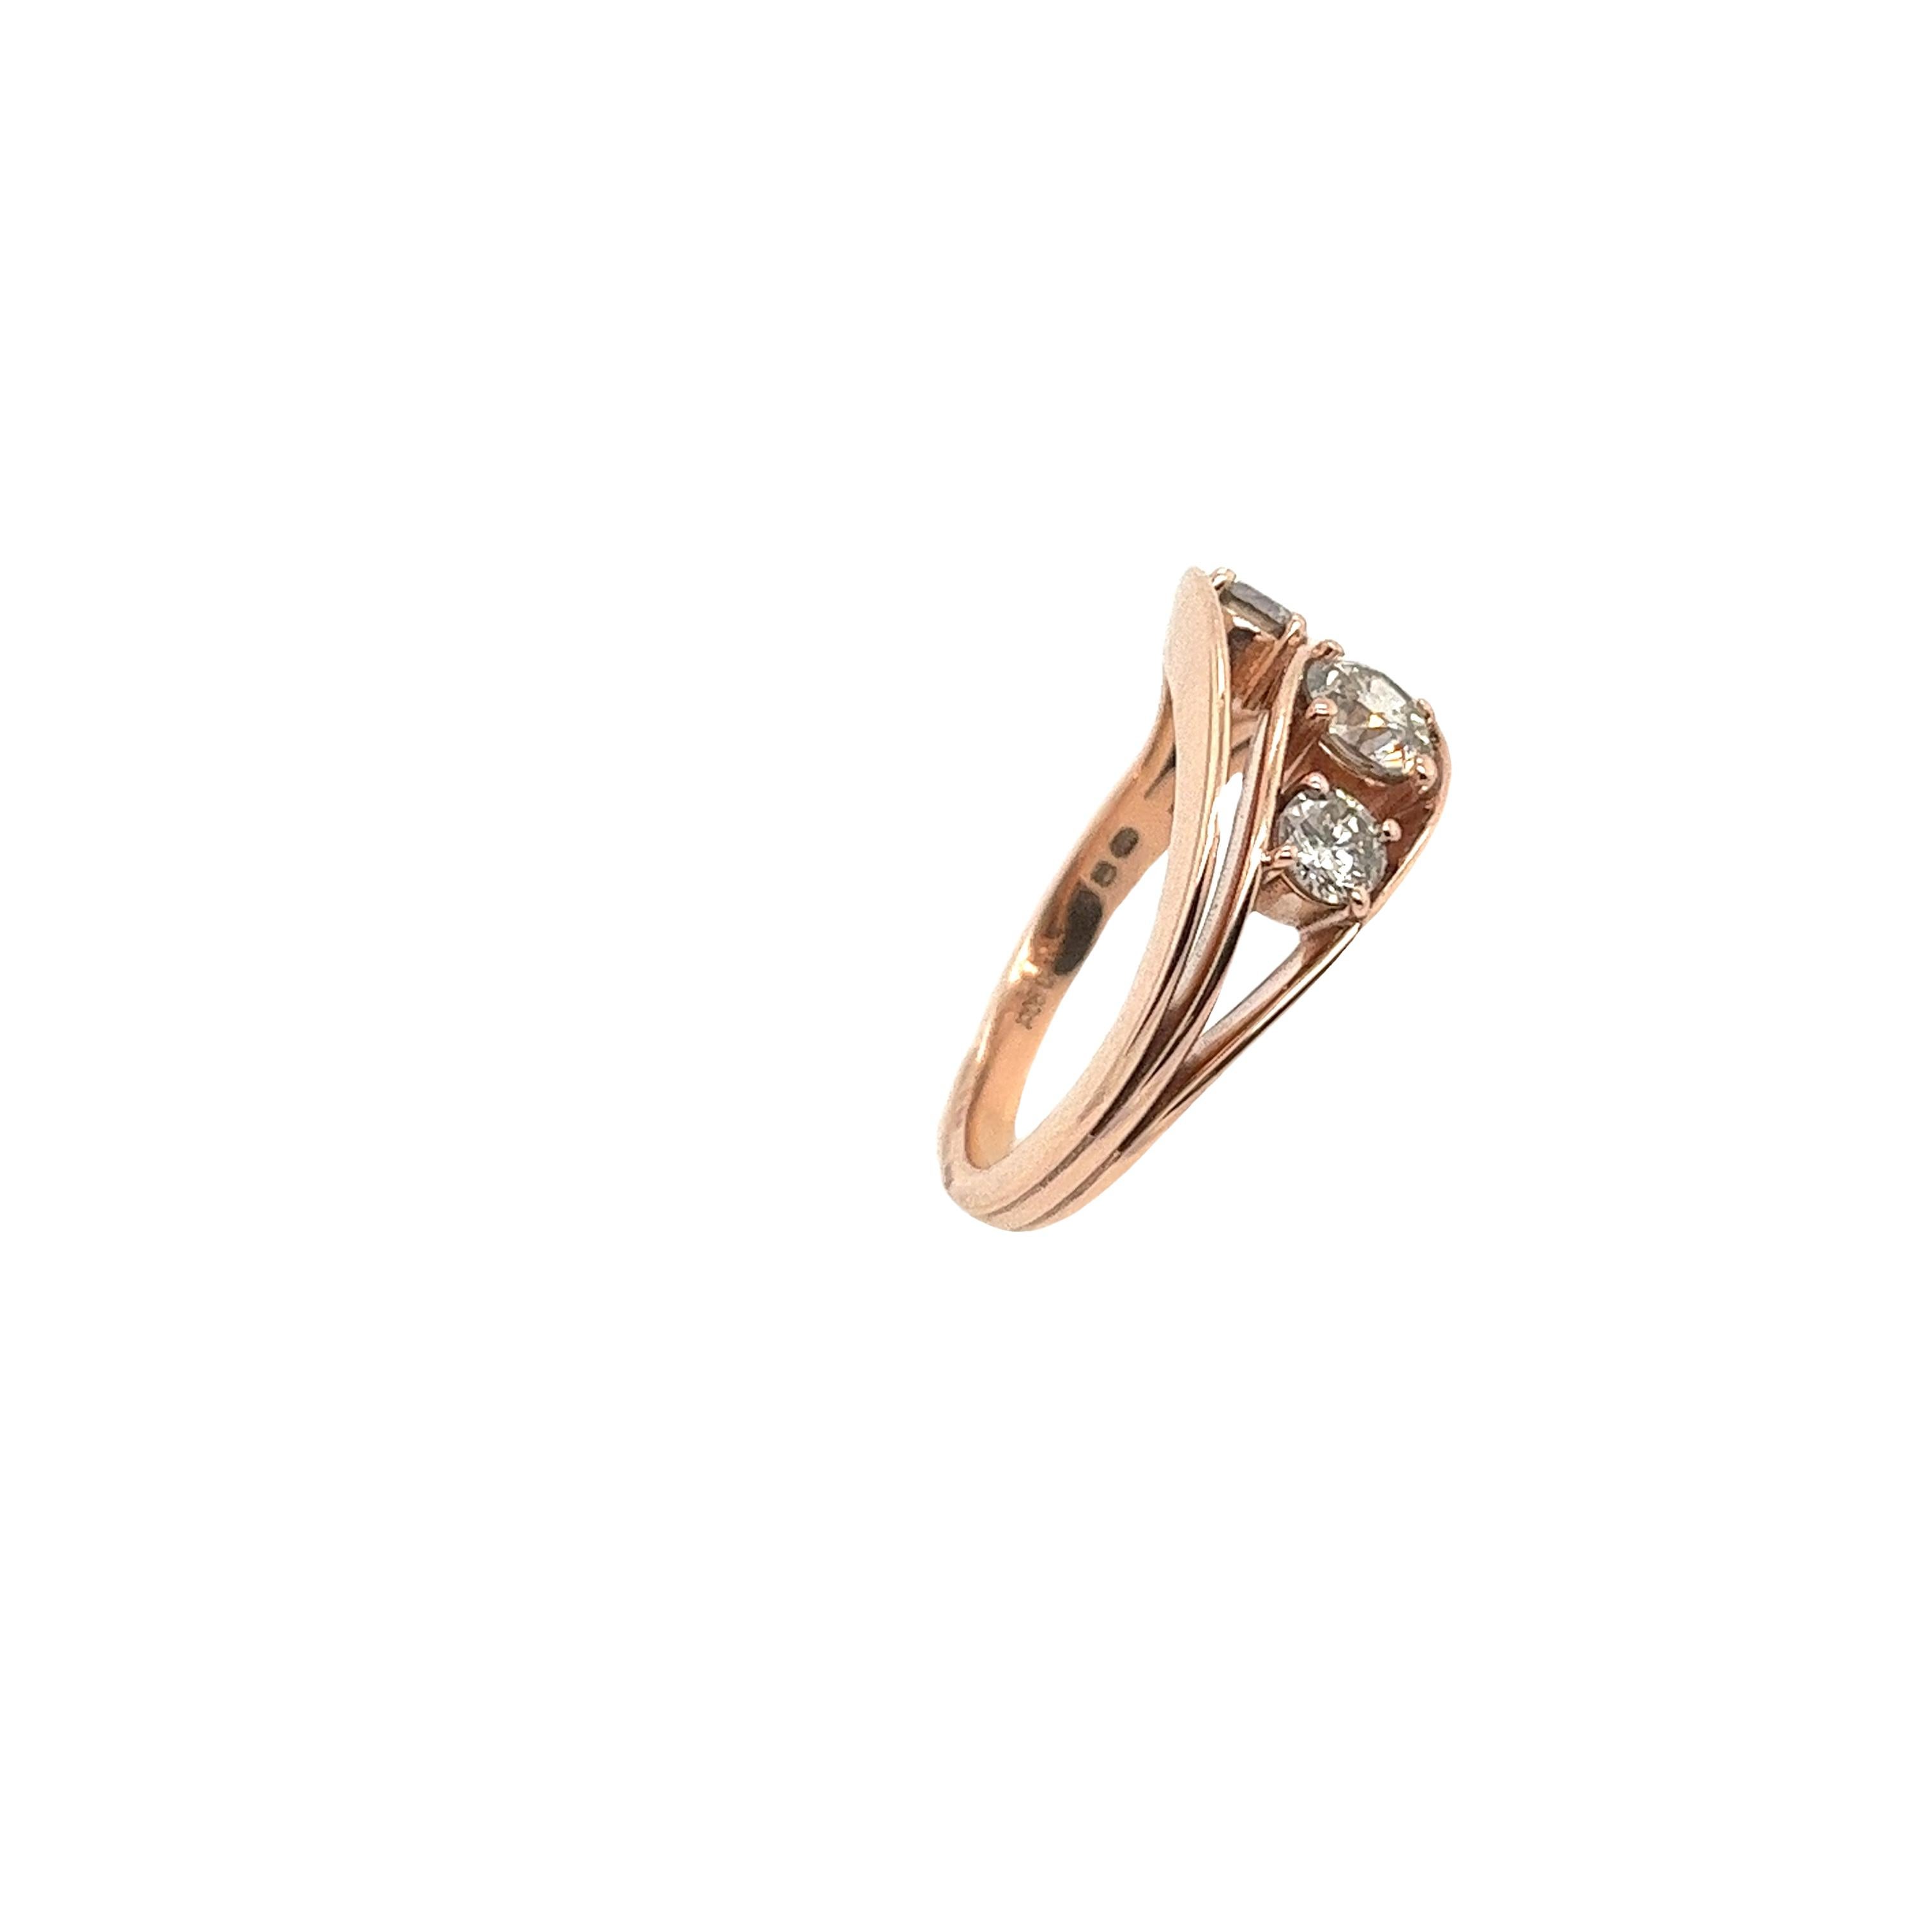 This gorgeous diamond 3-stone ring set in an 14ct rose gold setting, 
with 0.90 carats natural round brilliant cut diamonds.
This is a unique and eye-catching ring.
Total Diamond Weight: 0.90ct
Diamond Colour: P
Diamond Clarity: SI
Total Weight: